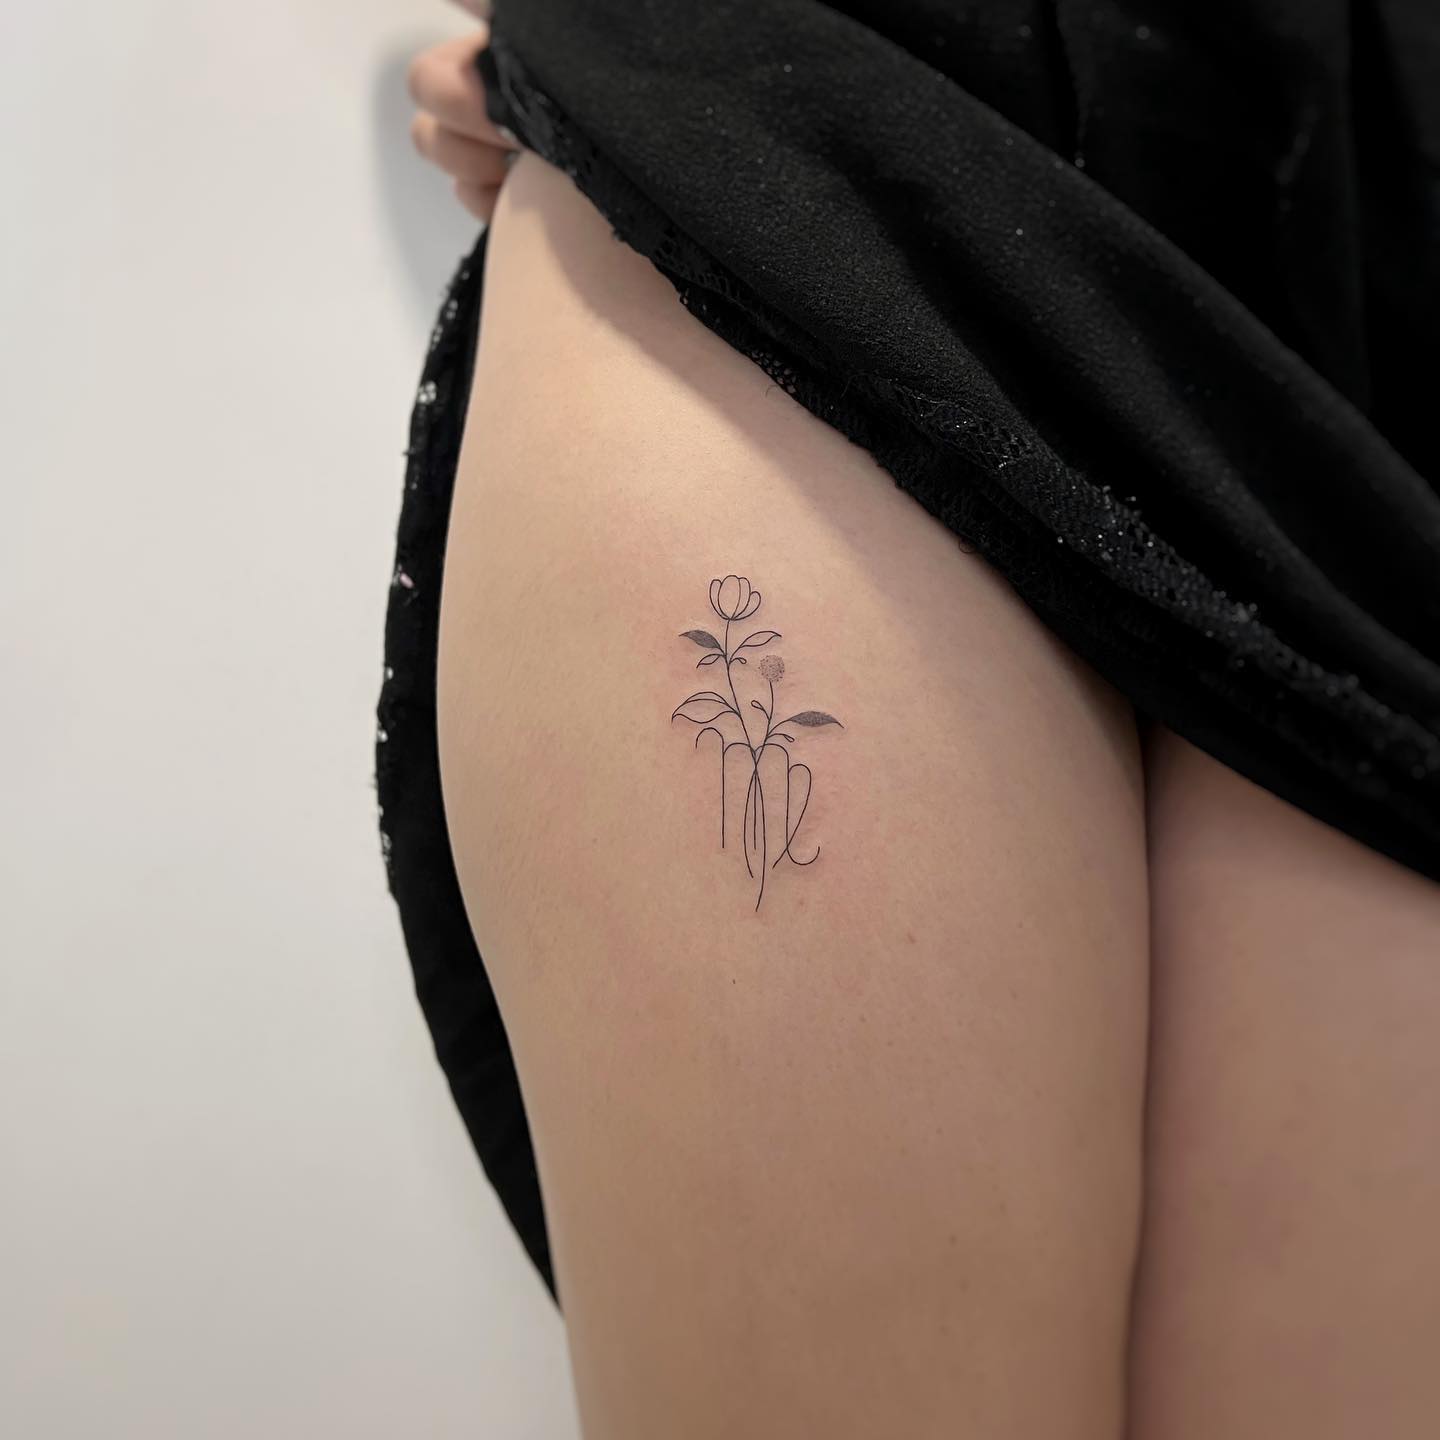 Virgo zodiac sign and flower tattoo on the thigh